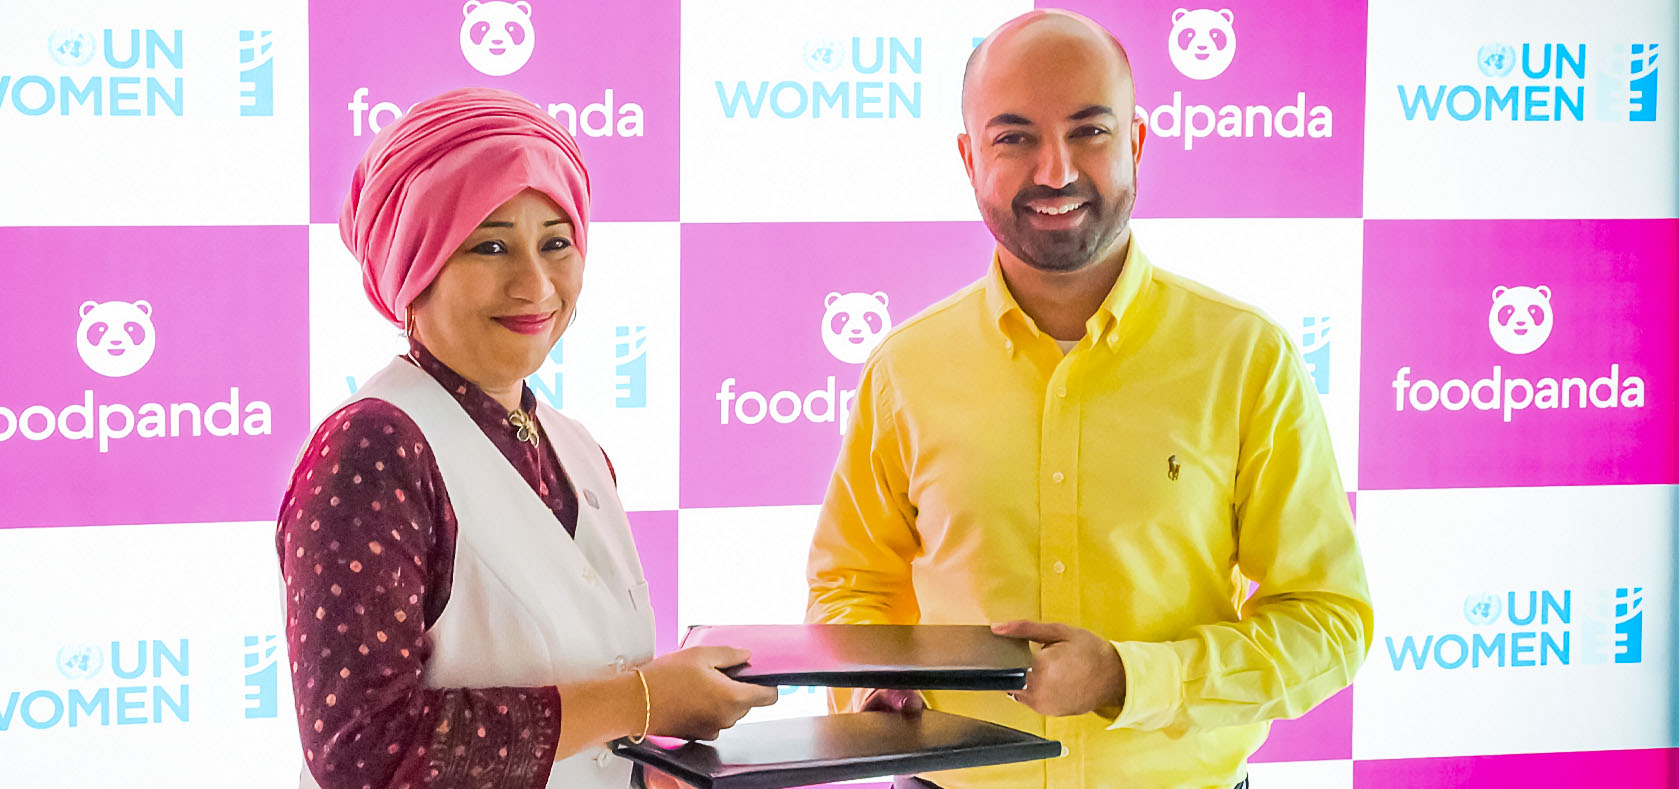 Image - UN Women Pakistan and foodpanda Pakistan collaborate for the promotion of workplace safety and gender equality for women